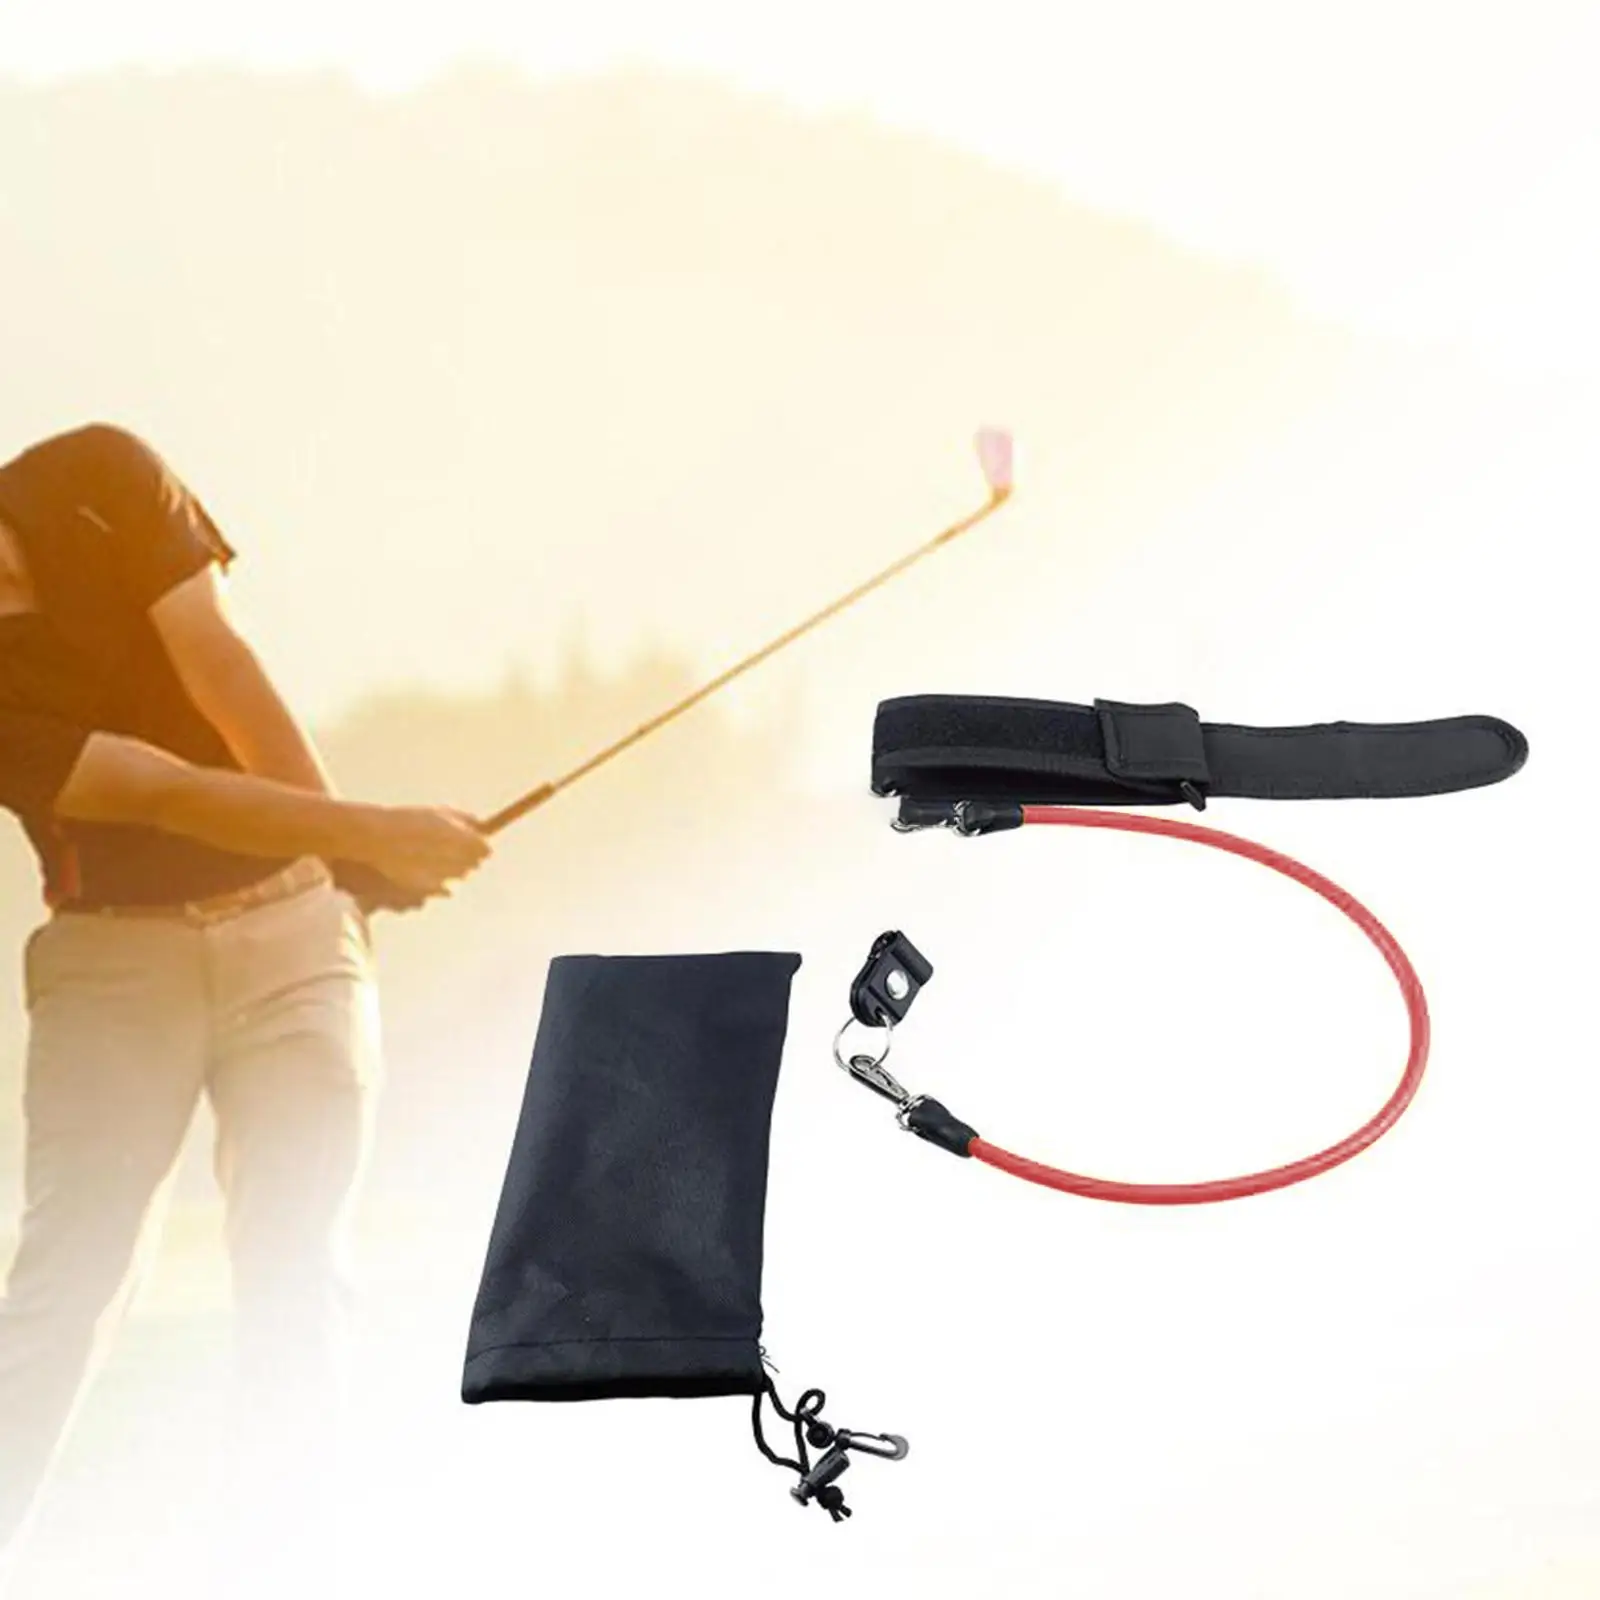 Golf Swing Release Trainer and Arm Band Portable with Storage Bag Correction Tool Set for Swing Strength Teaching Men Women